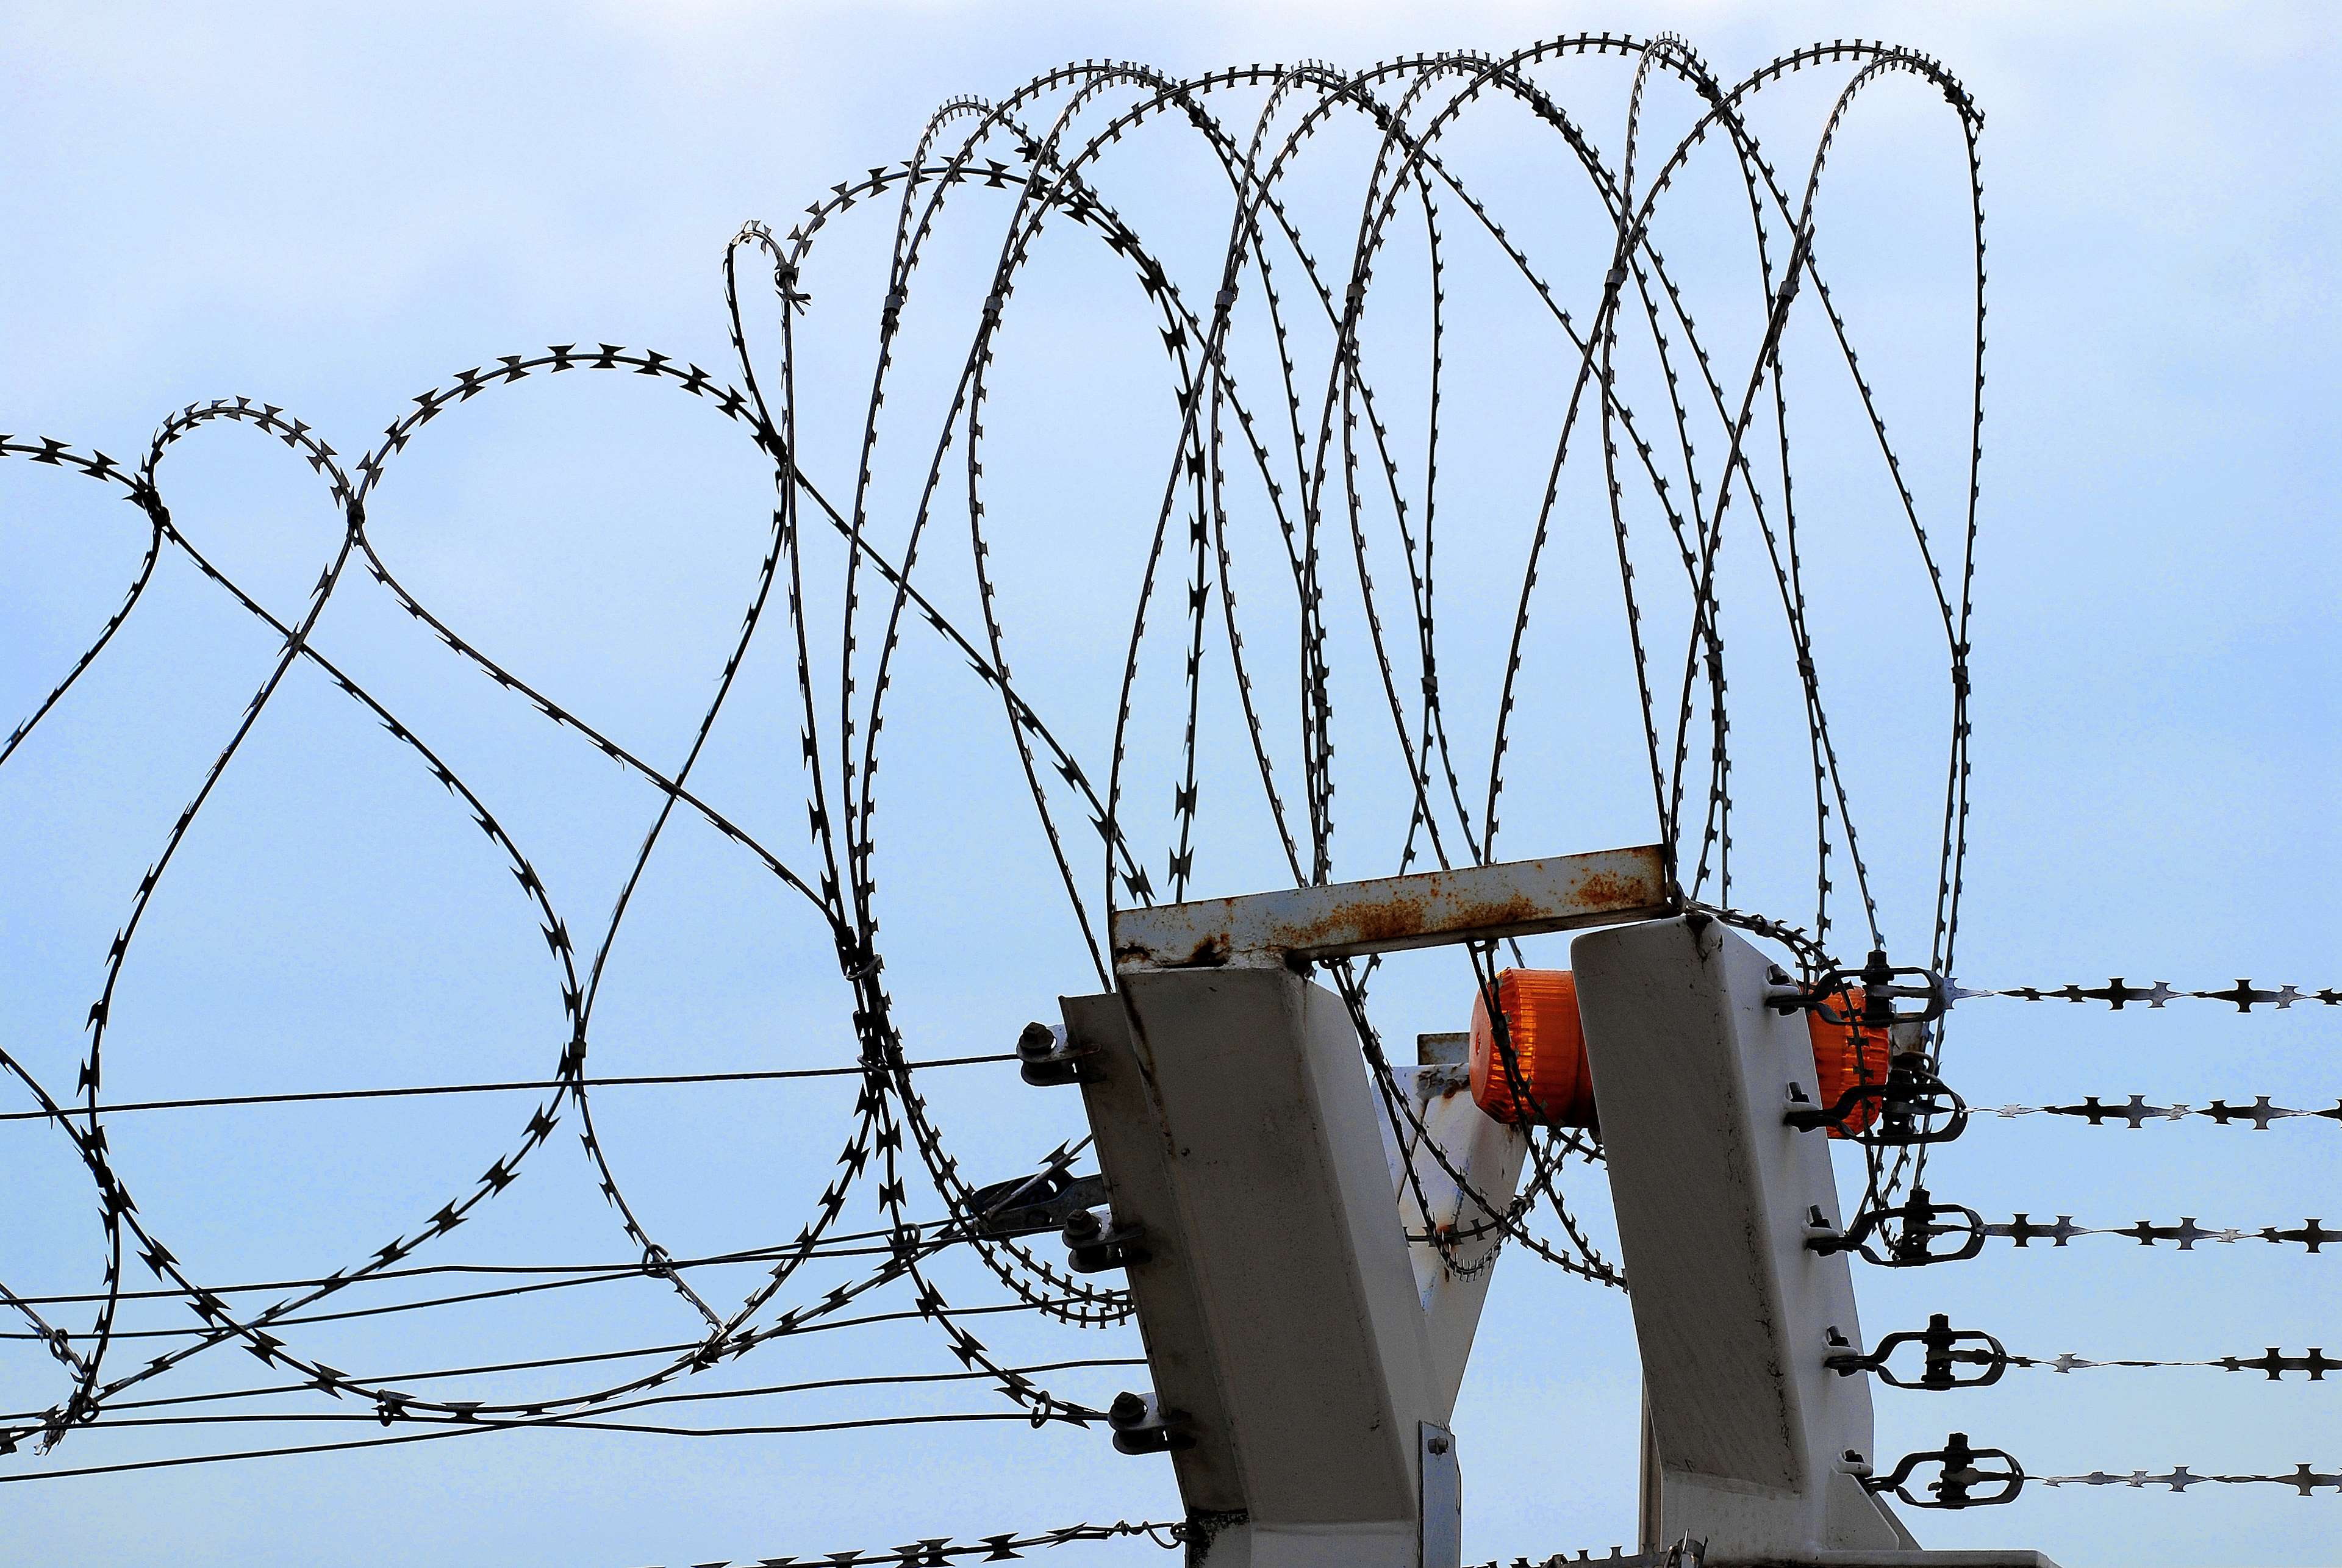 barbed wire, theme layers, safety, fence, security, protection